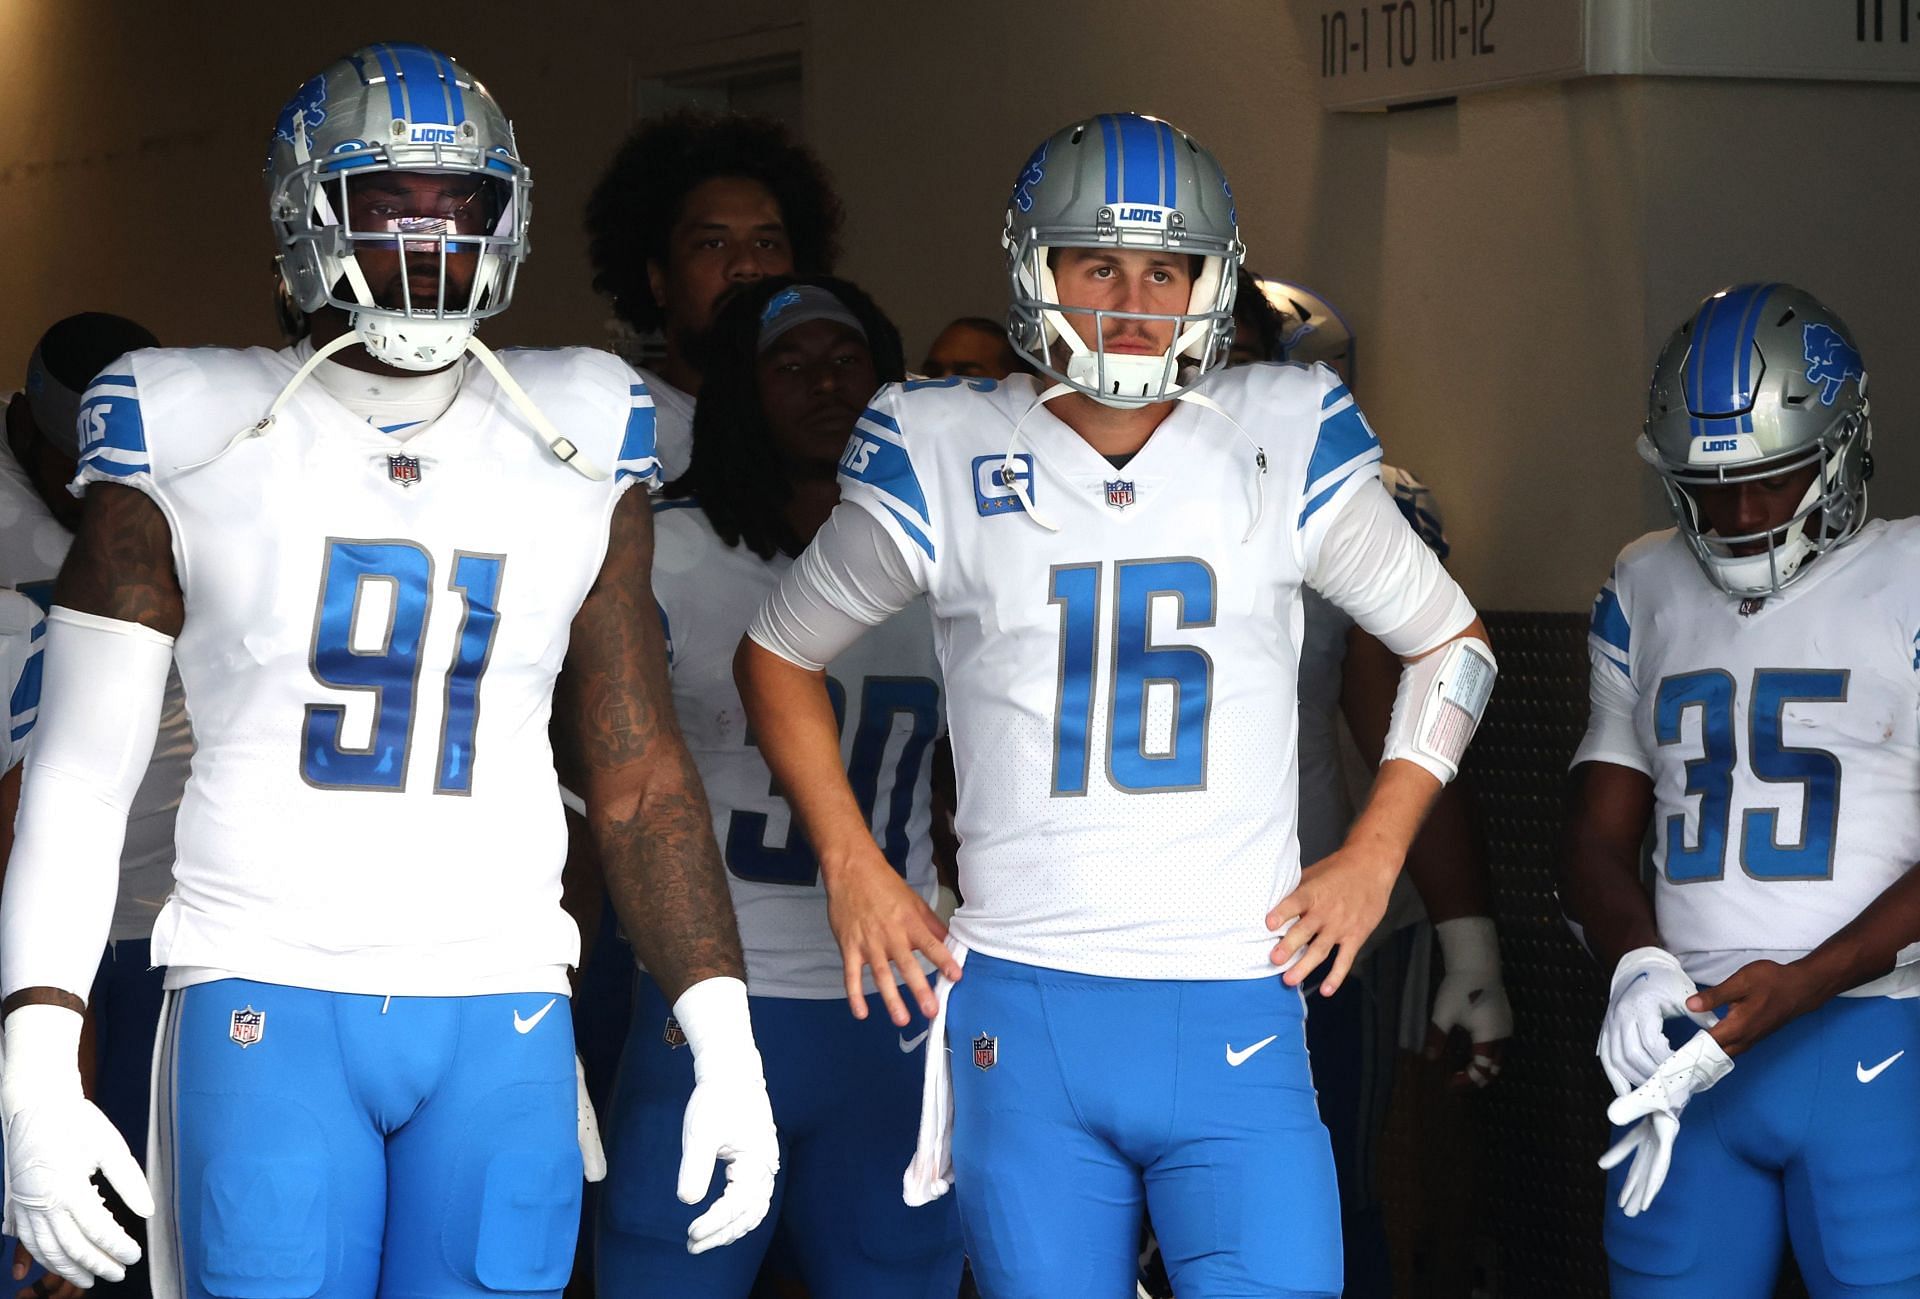 Will The Detroit Lions Go 0-17? Michigan Sportsbooks Have Posted Odds